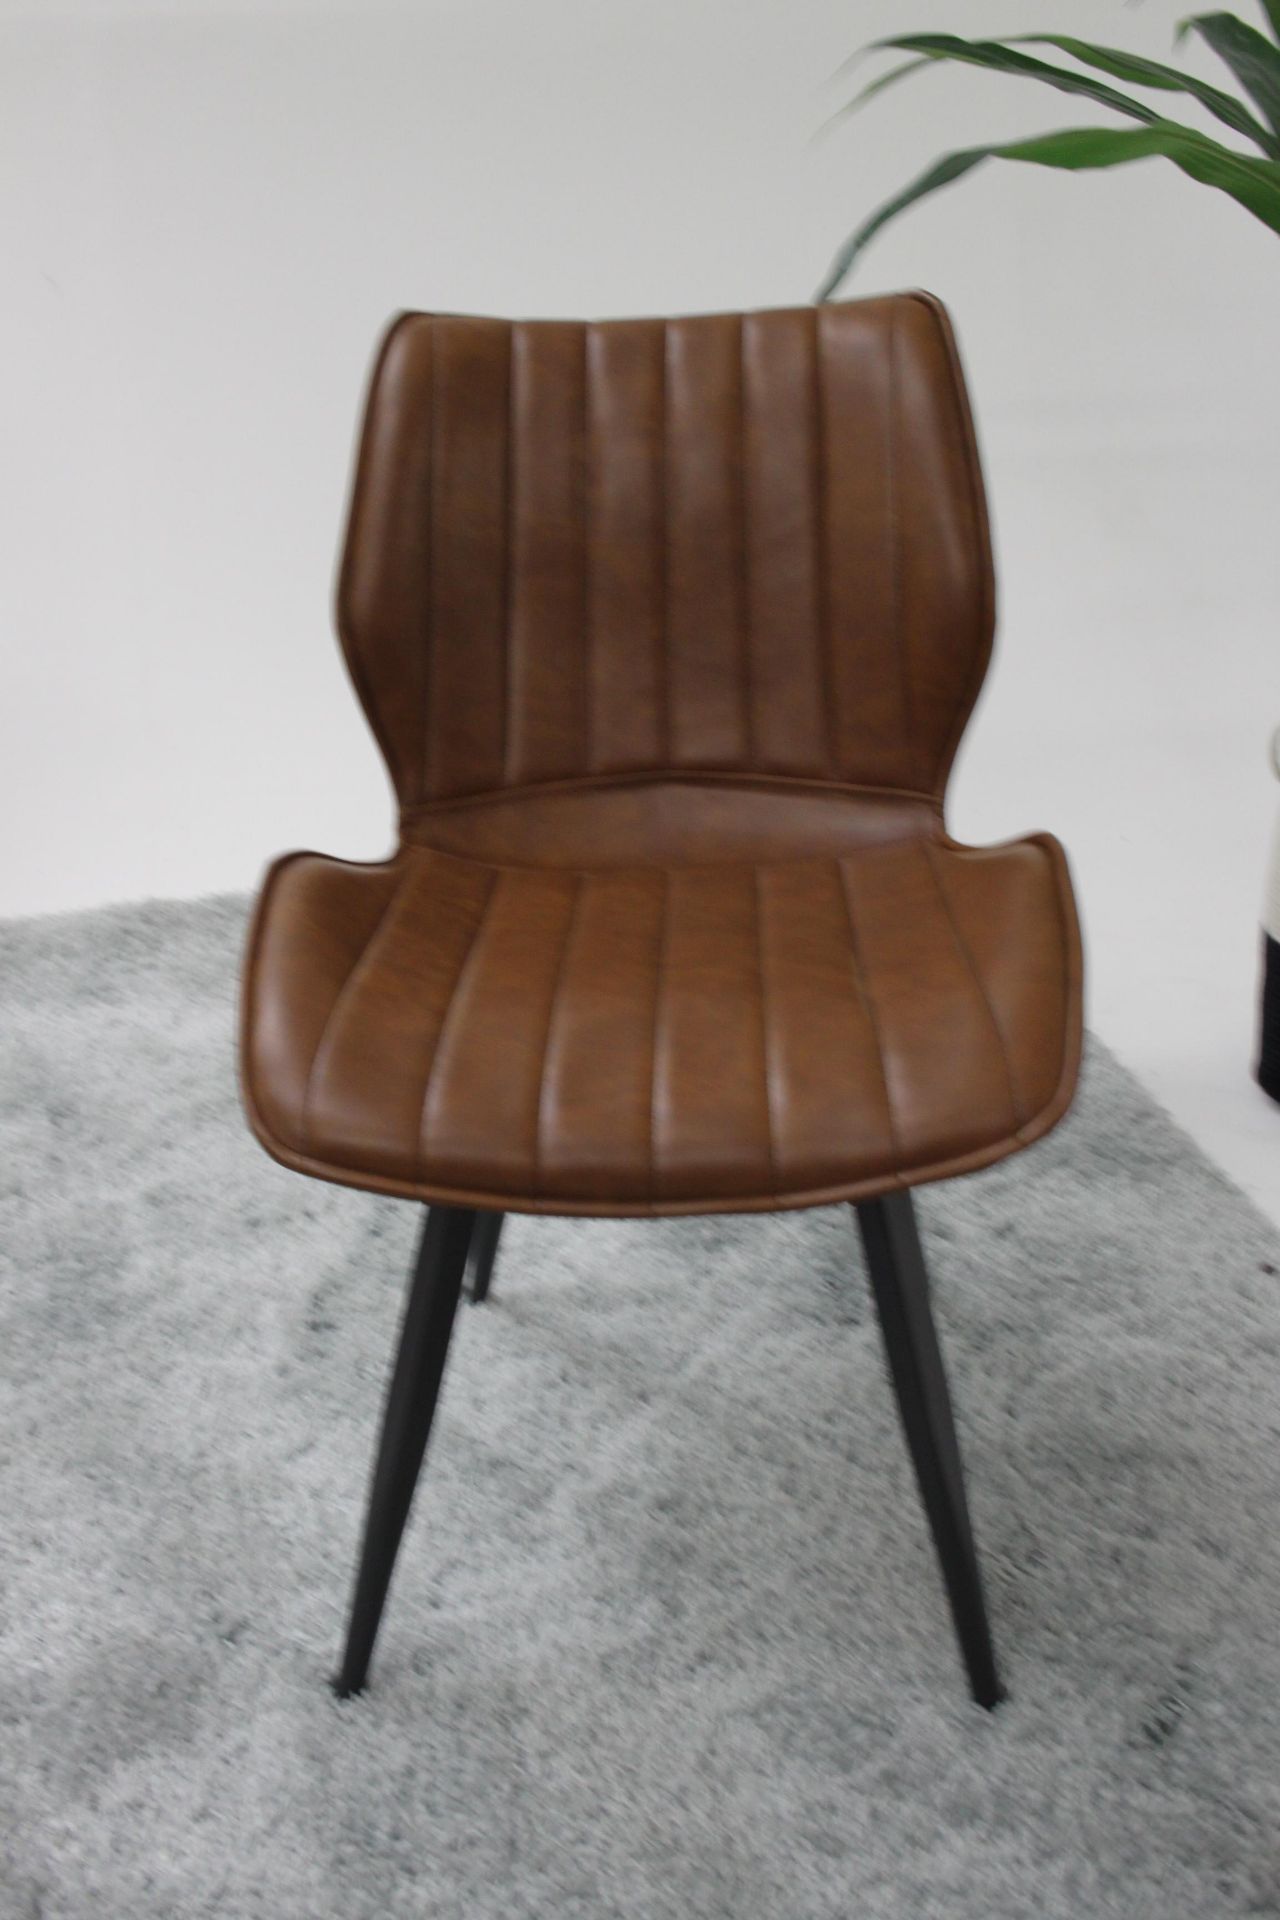 Alfa Ribbed Dining Chair Vegan Leather Tan Quilted Upholstery - Image 4 of 4